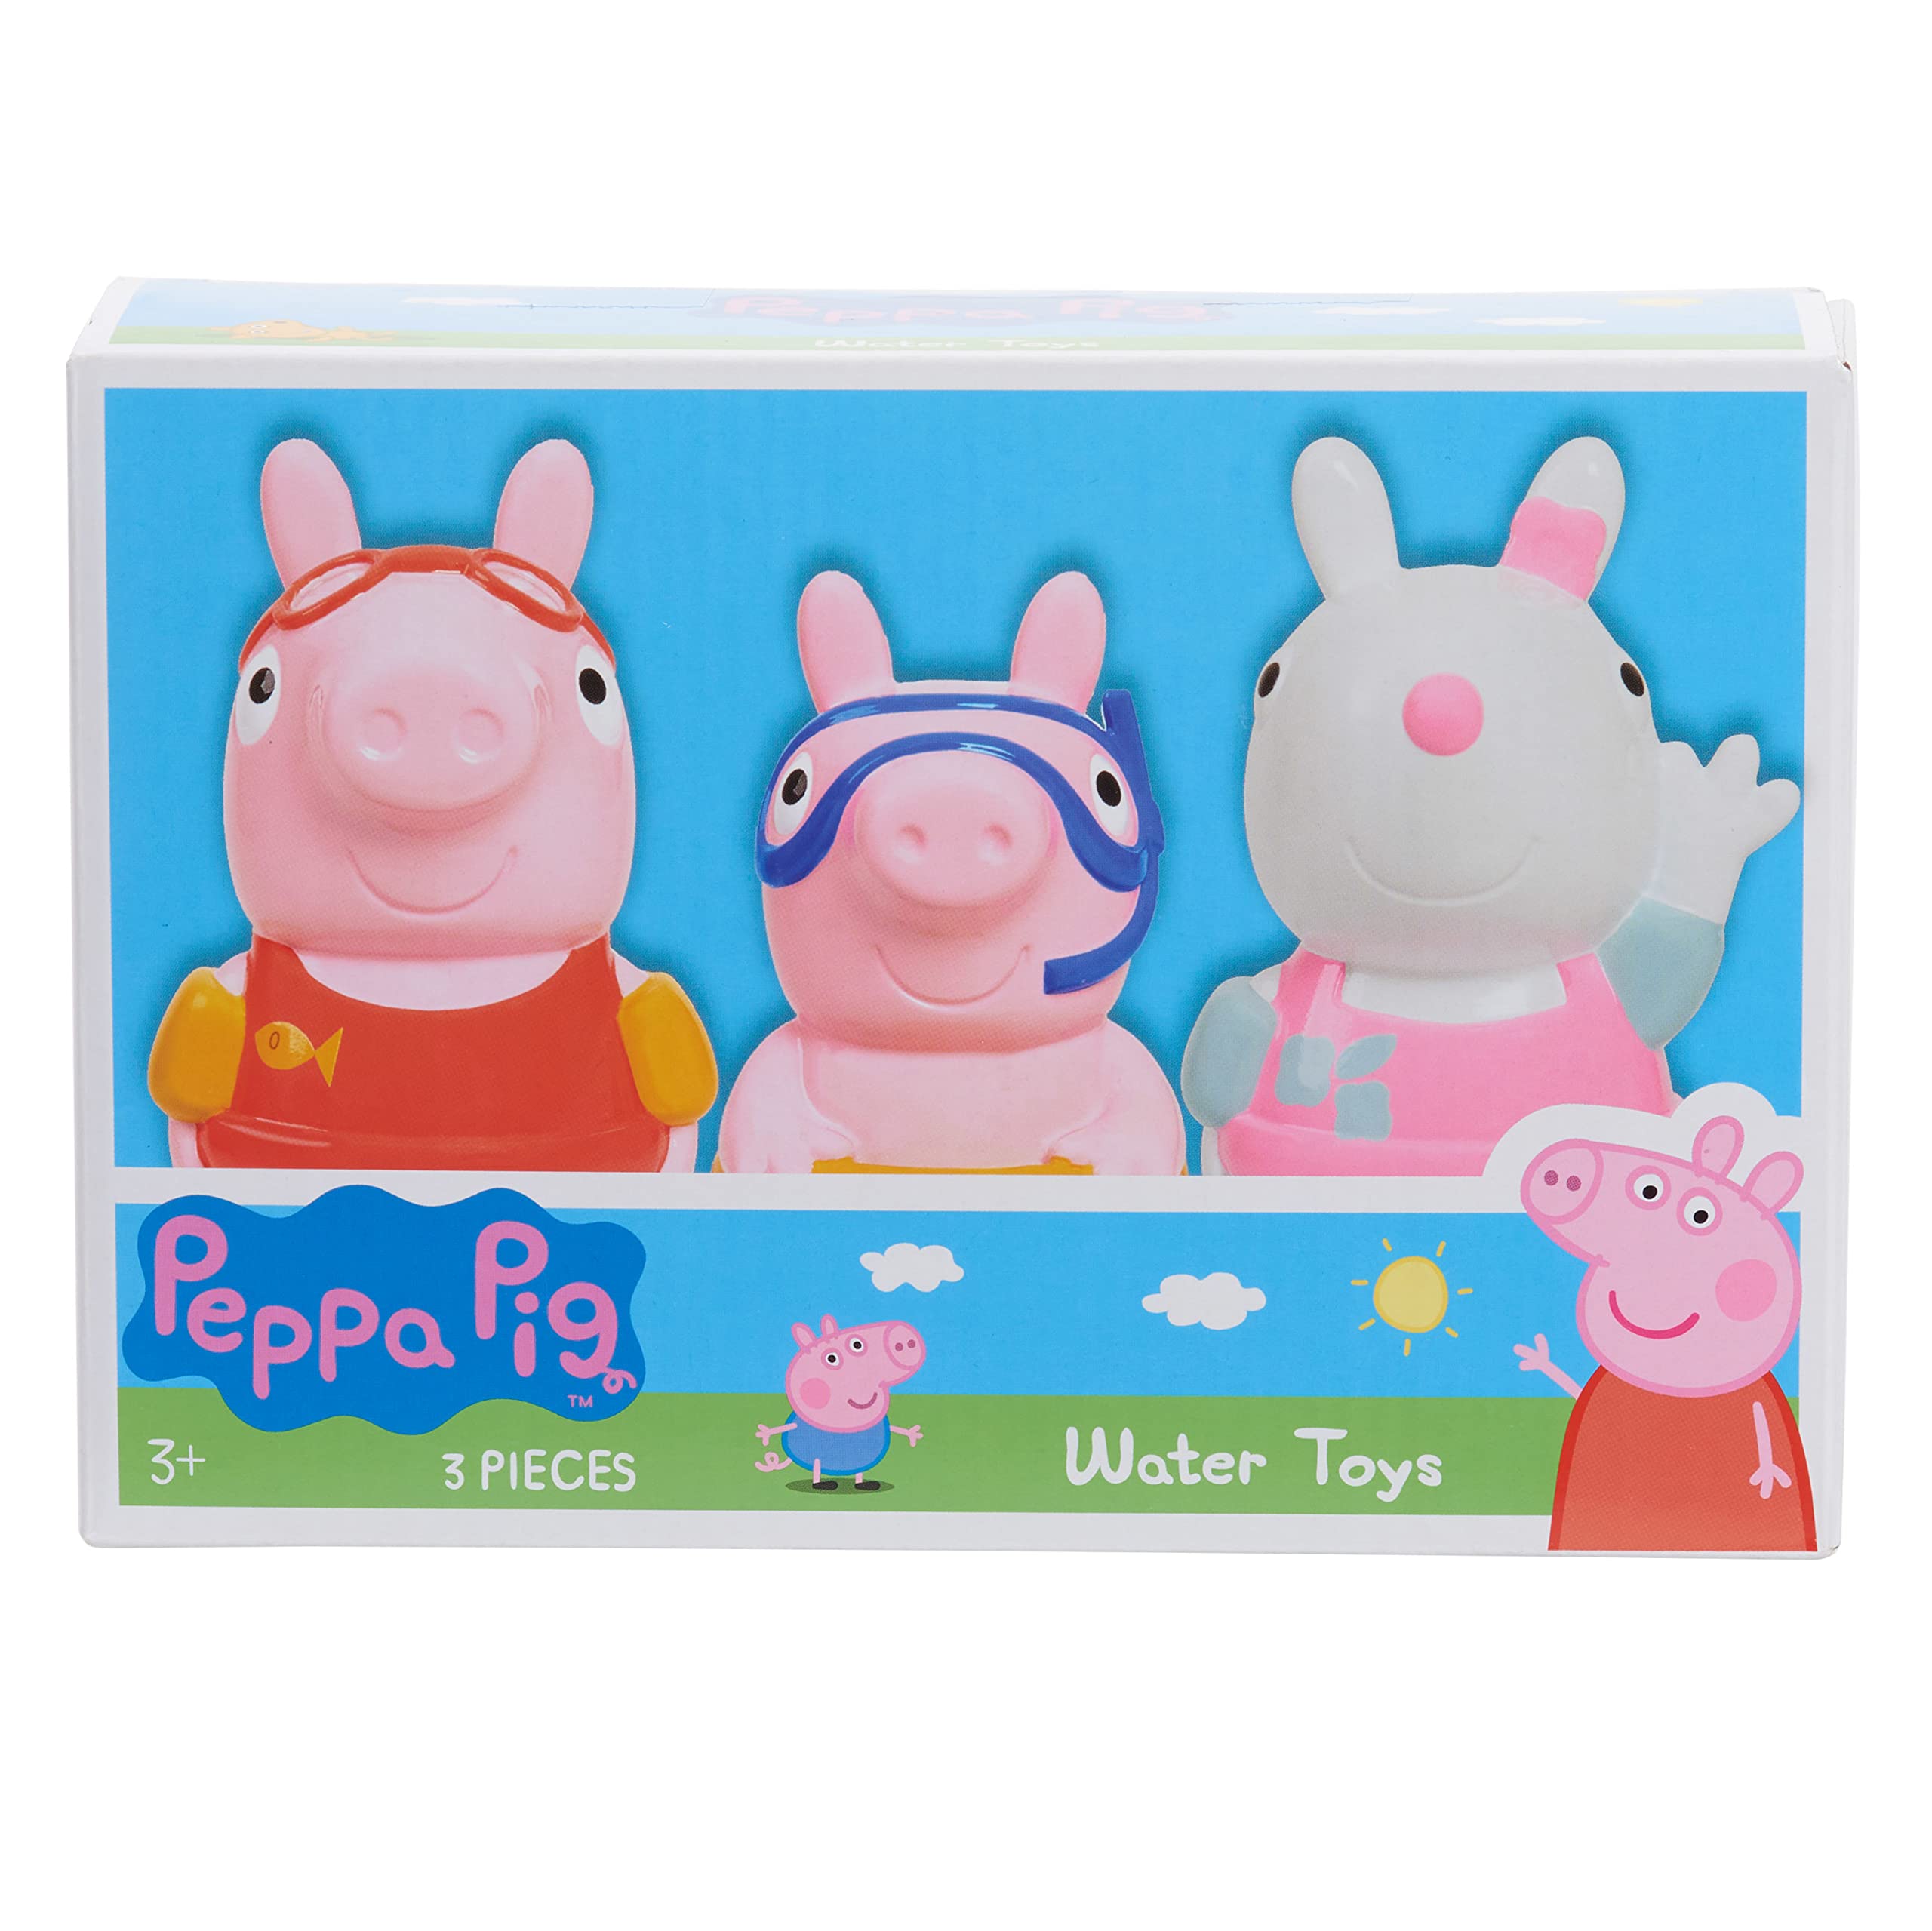 Peppa Pig Bath Toys 3-piece Set, Kids Toys for Ages 3 Up, Basket Stuffers and Small Gifts, Amazon Exclusive